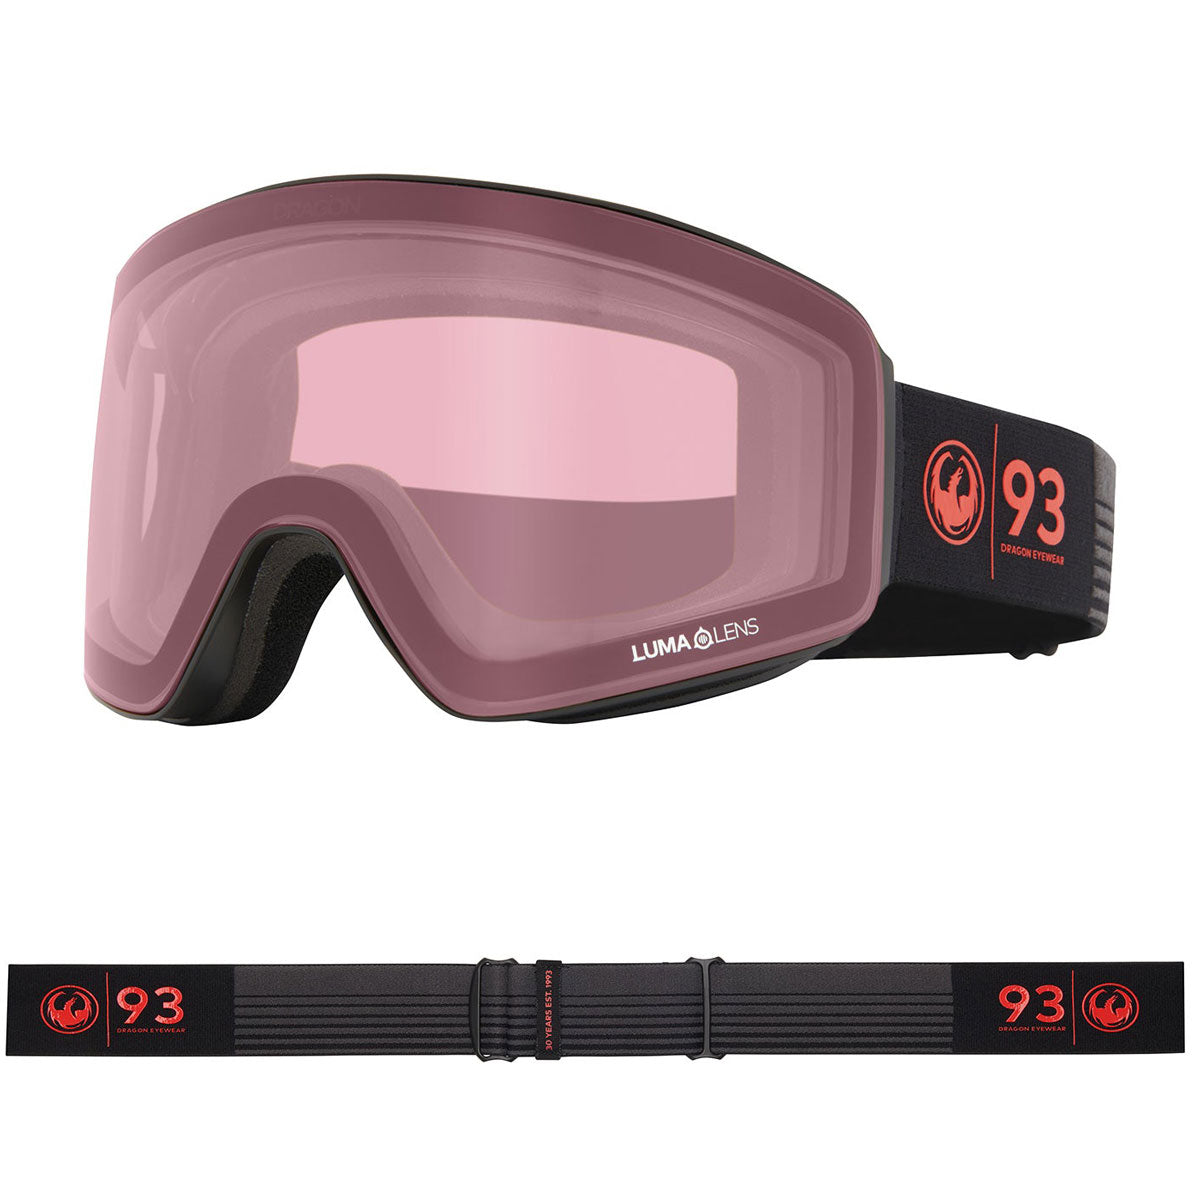 Dragon DR PXV Snowboard Goggles - 30yrs/Red Ion/Light Rose image 4